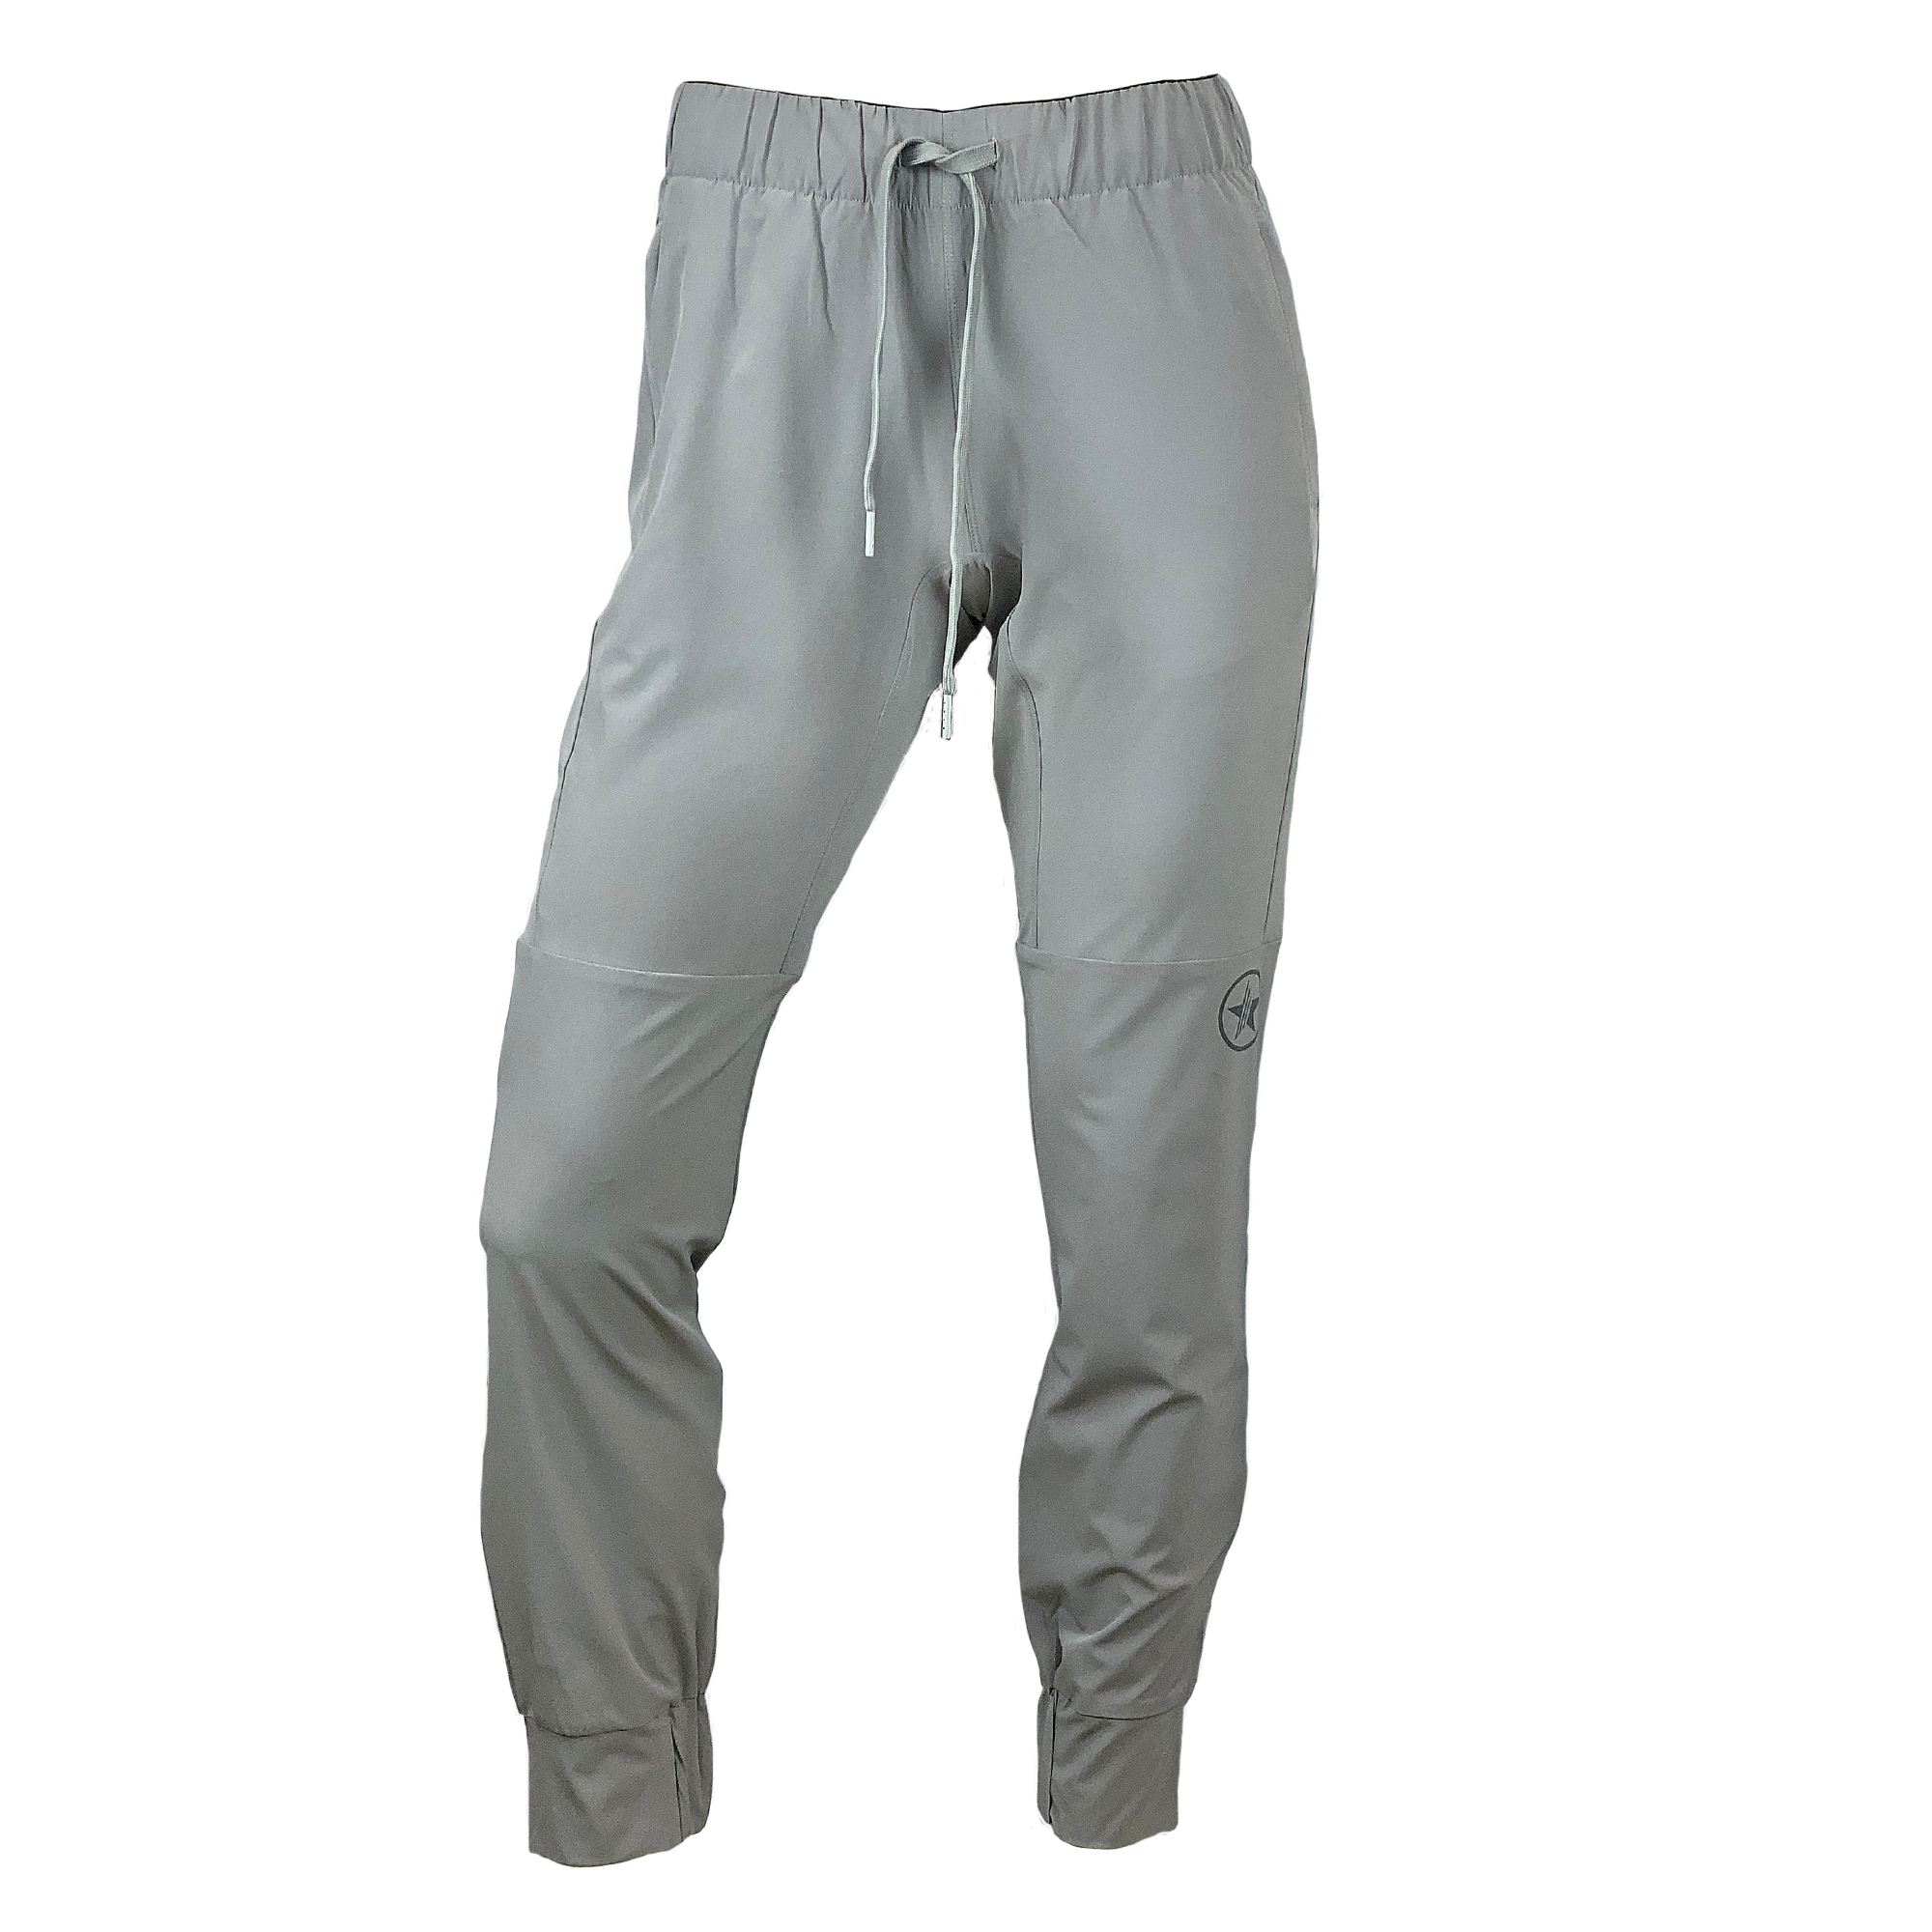 NWT Patagonia Women's Tech Joggers, Size Large, Drifter Grey - clothing &  accessories - by owner - apparel sale 